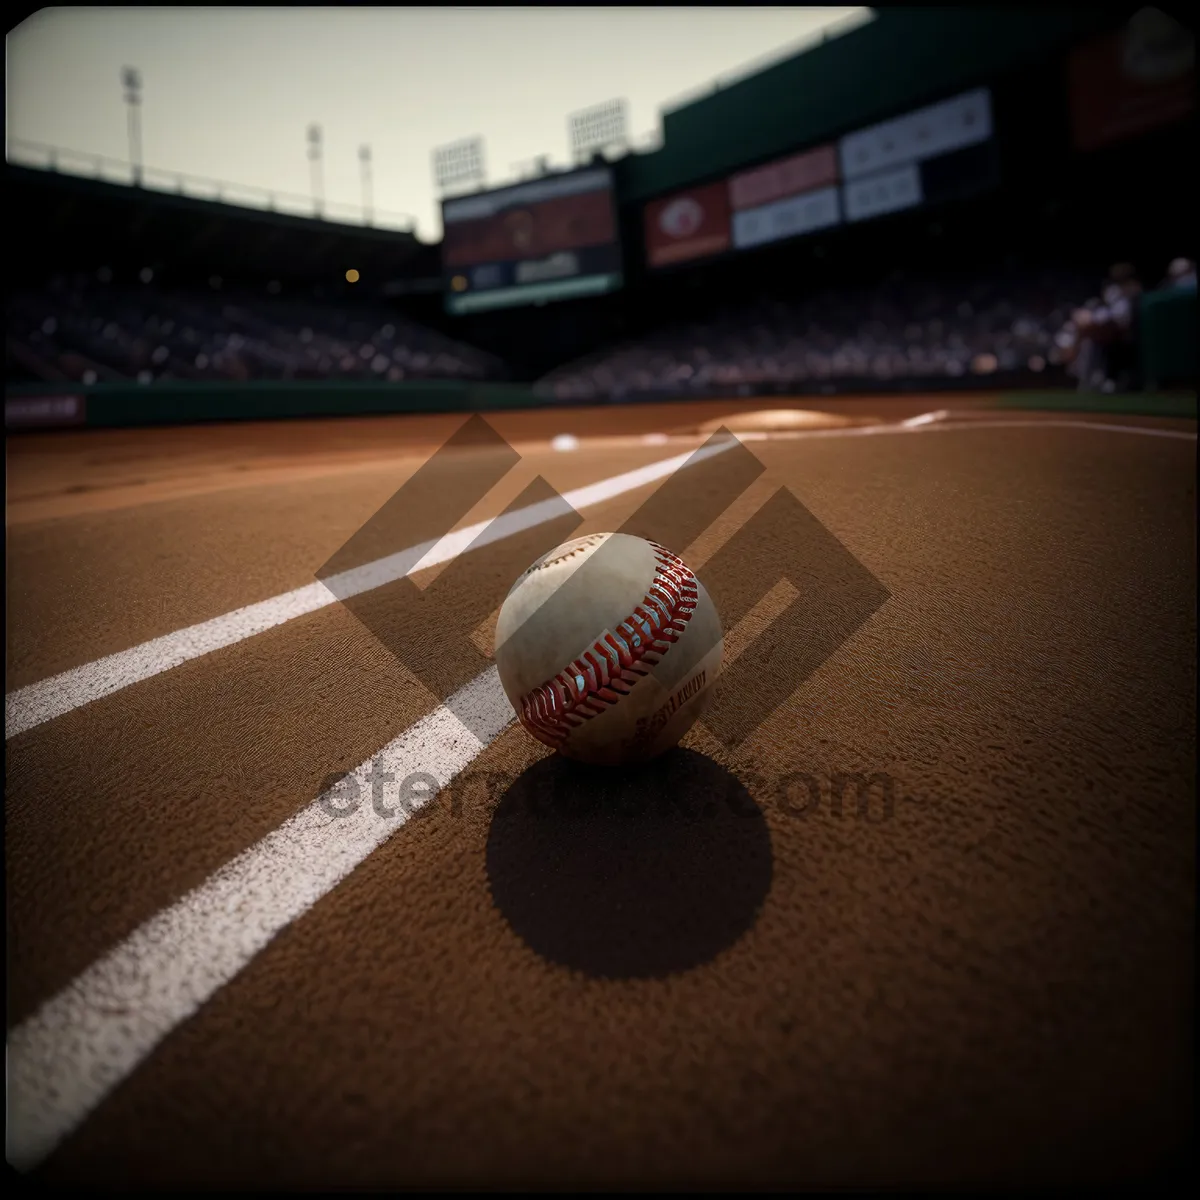 Picture of Baseball equipment on grass field with glove and ball